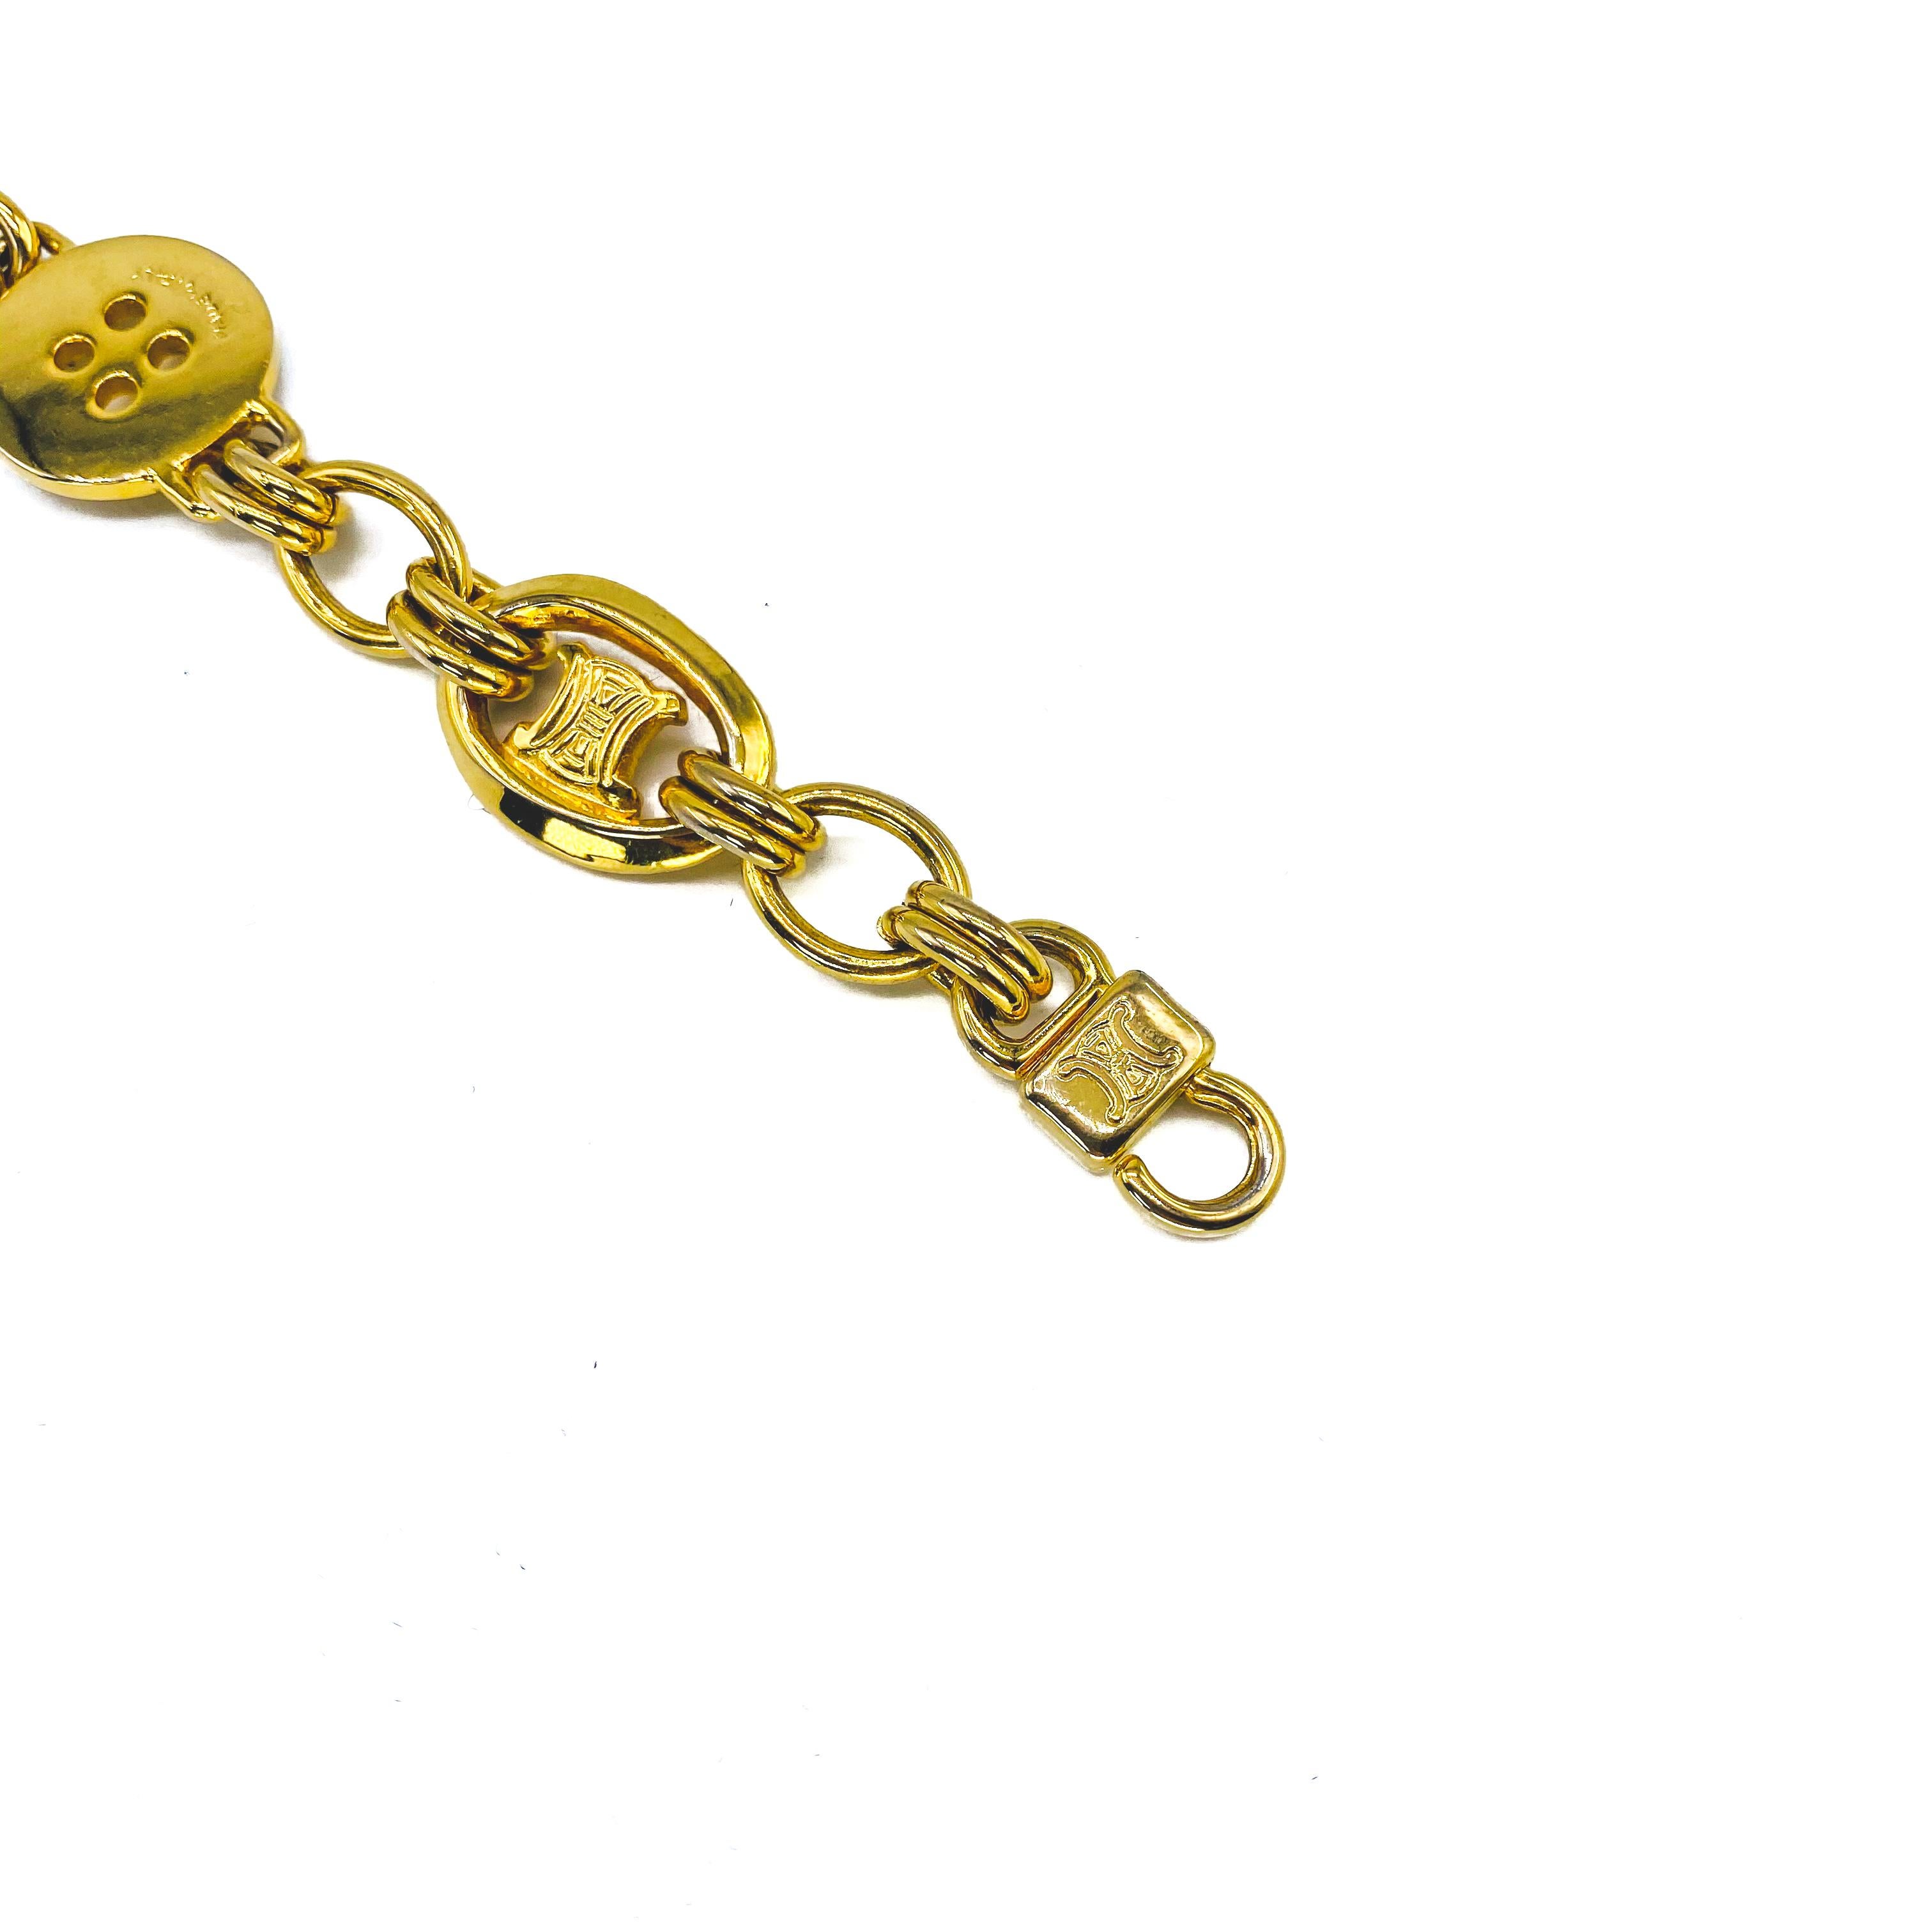 Celine Vintage 1980s Bracelet

Super versatile statement piece from the 90s Celine archive

Detail
-Made in Italy in the 1980s
-Crafted from gold plated metal
-Featuring the iconic Macadam logo

Size & Fit
-Length approx 7 inches 
-Width approx 0.5